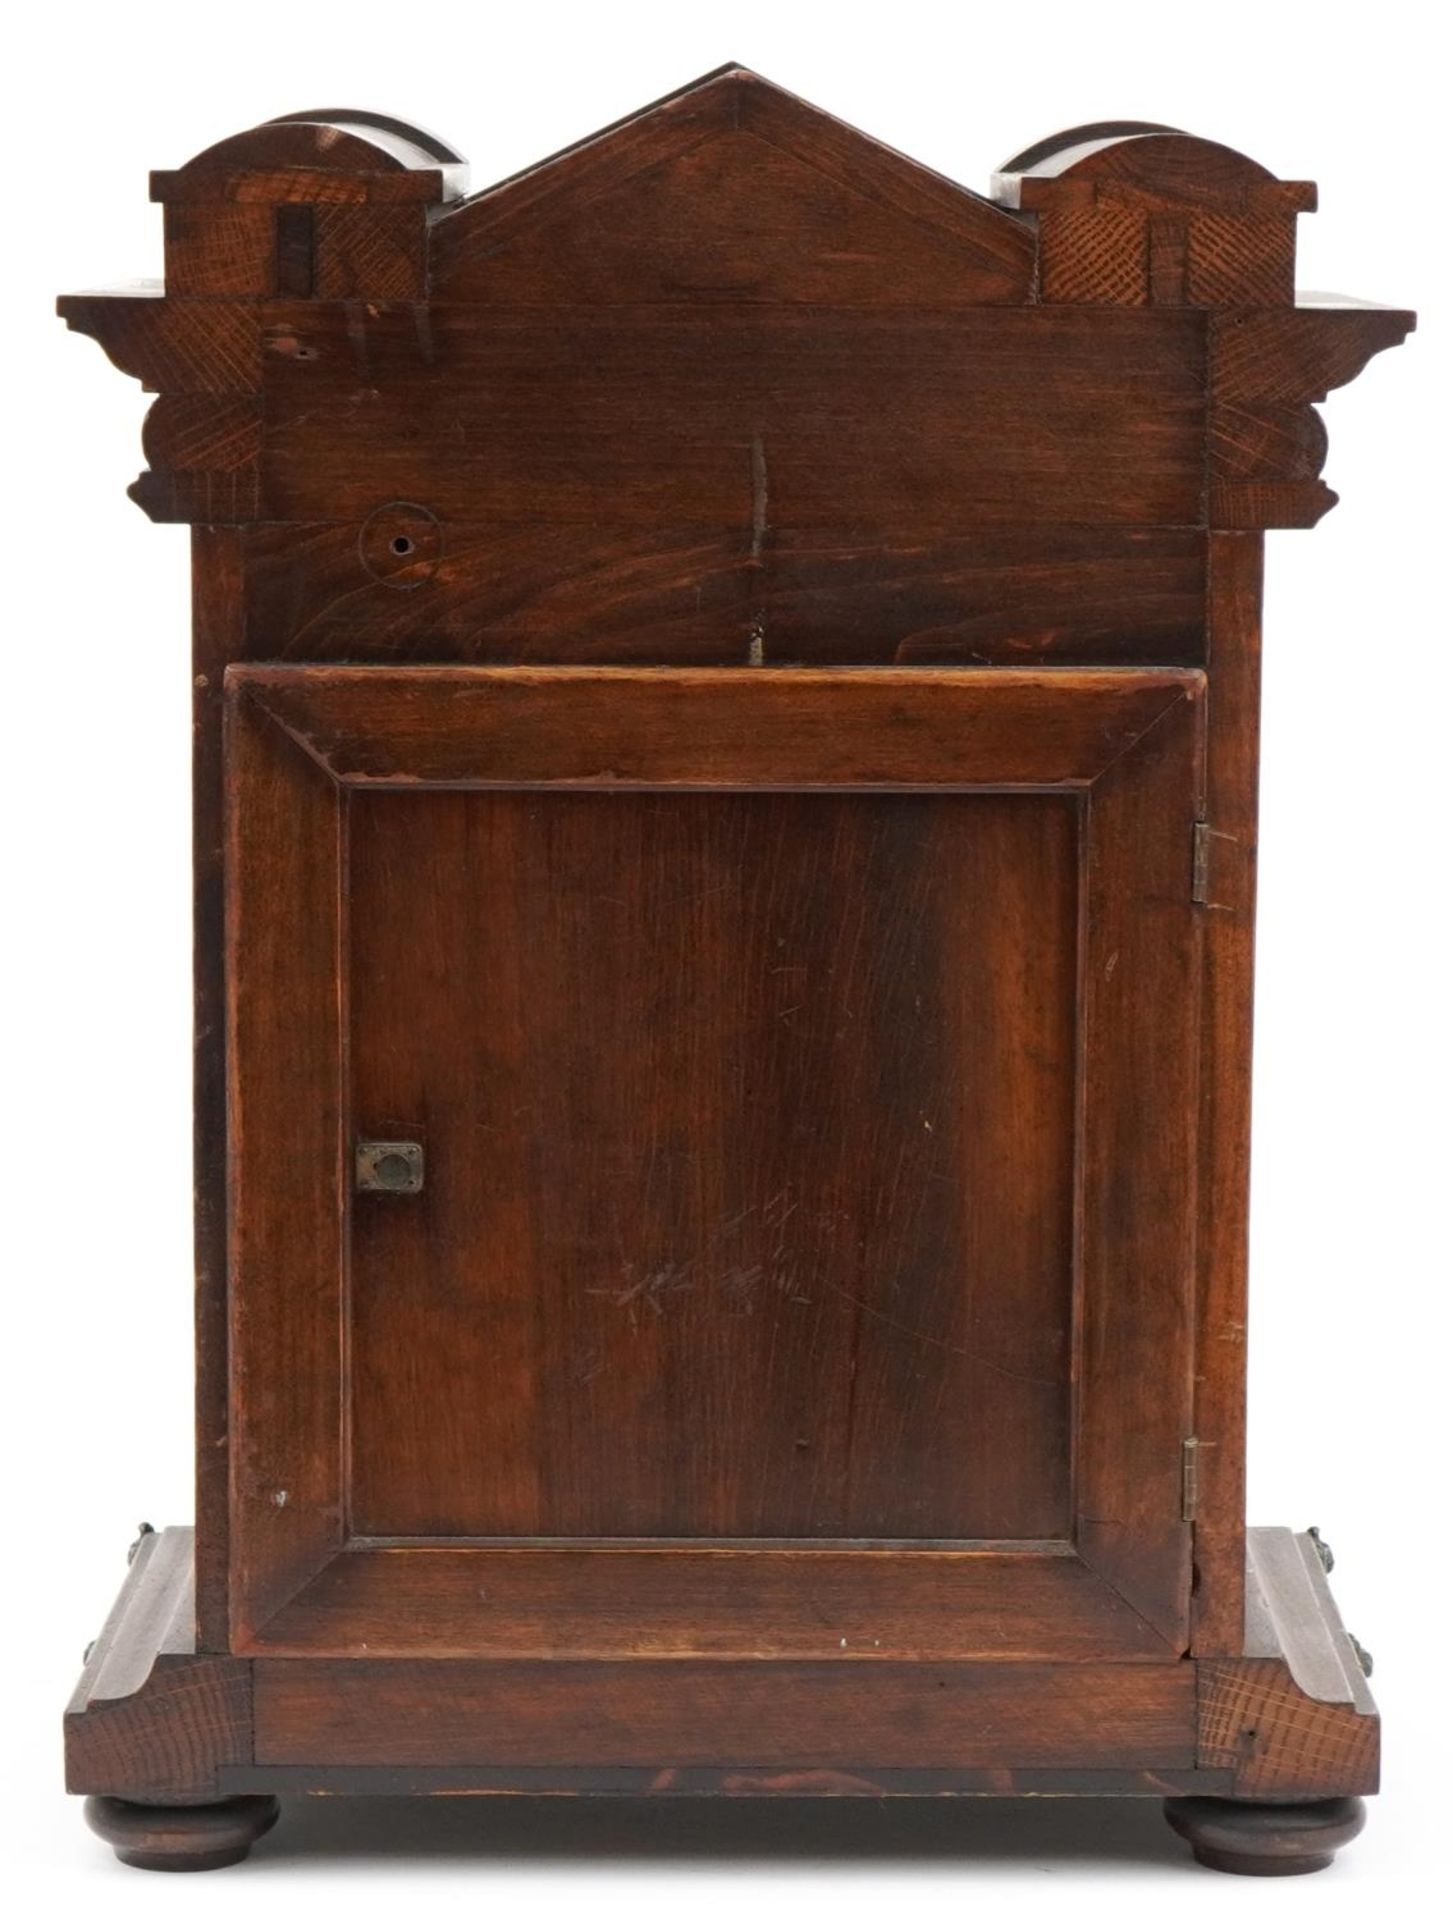 19th century oak bracket clock striking on five rods with Westminster chime, with Corinthian - Image 3 of 5